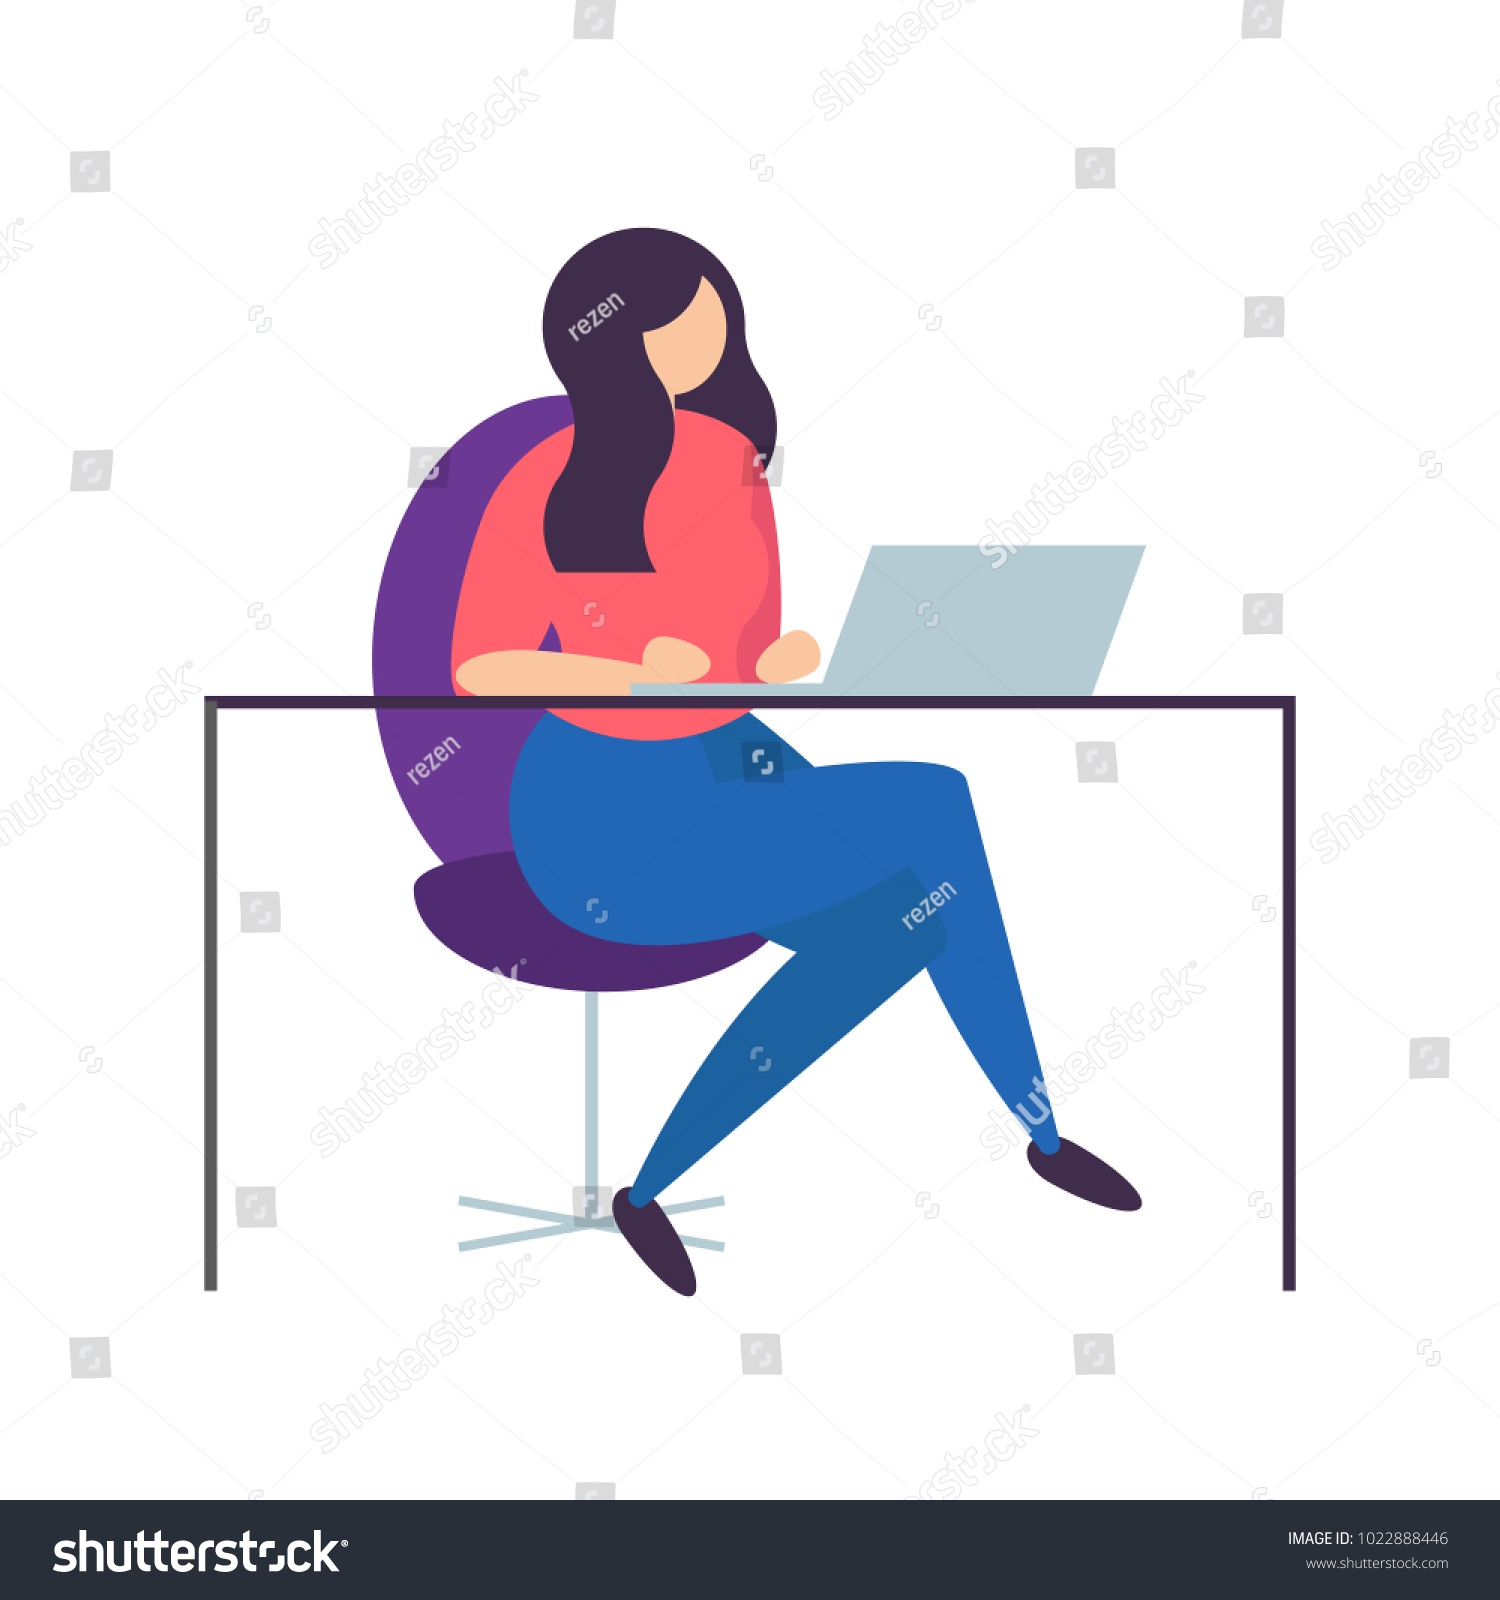 Girl Sitting Desk Working On Computer Stock Vector (Royalty Free ...